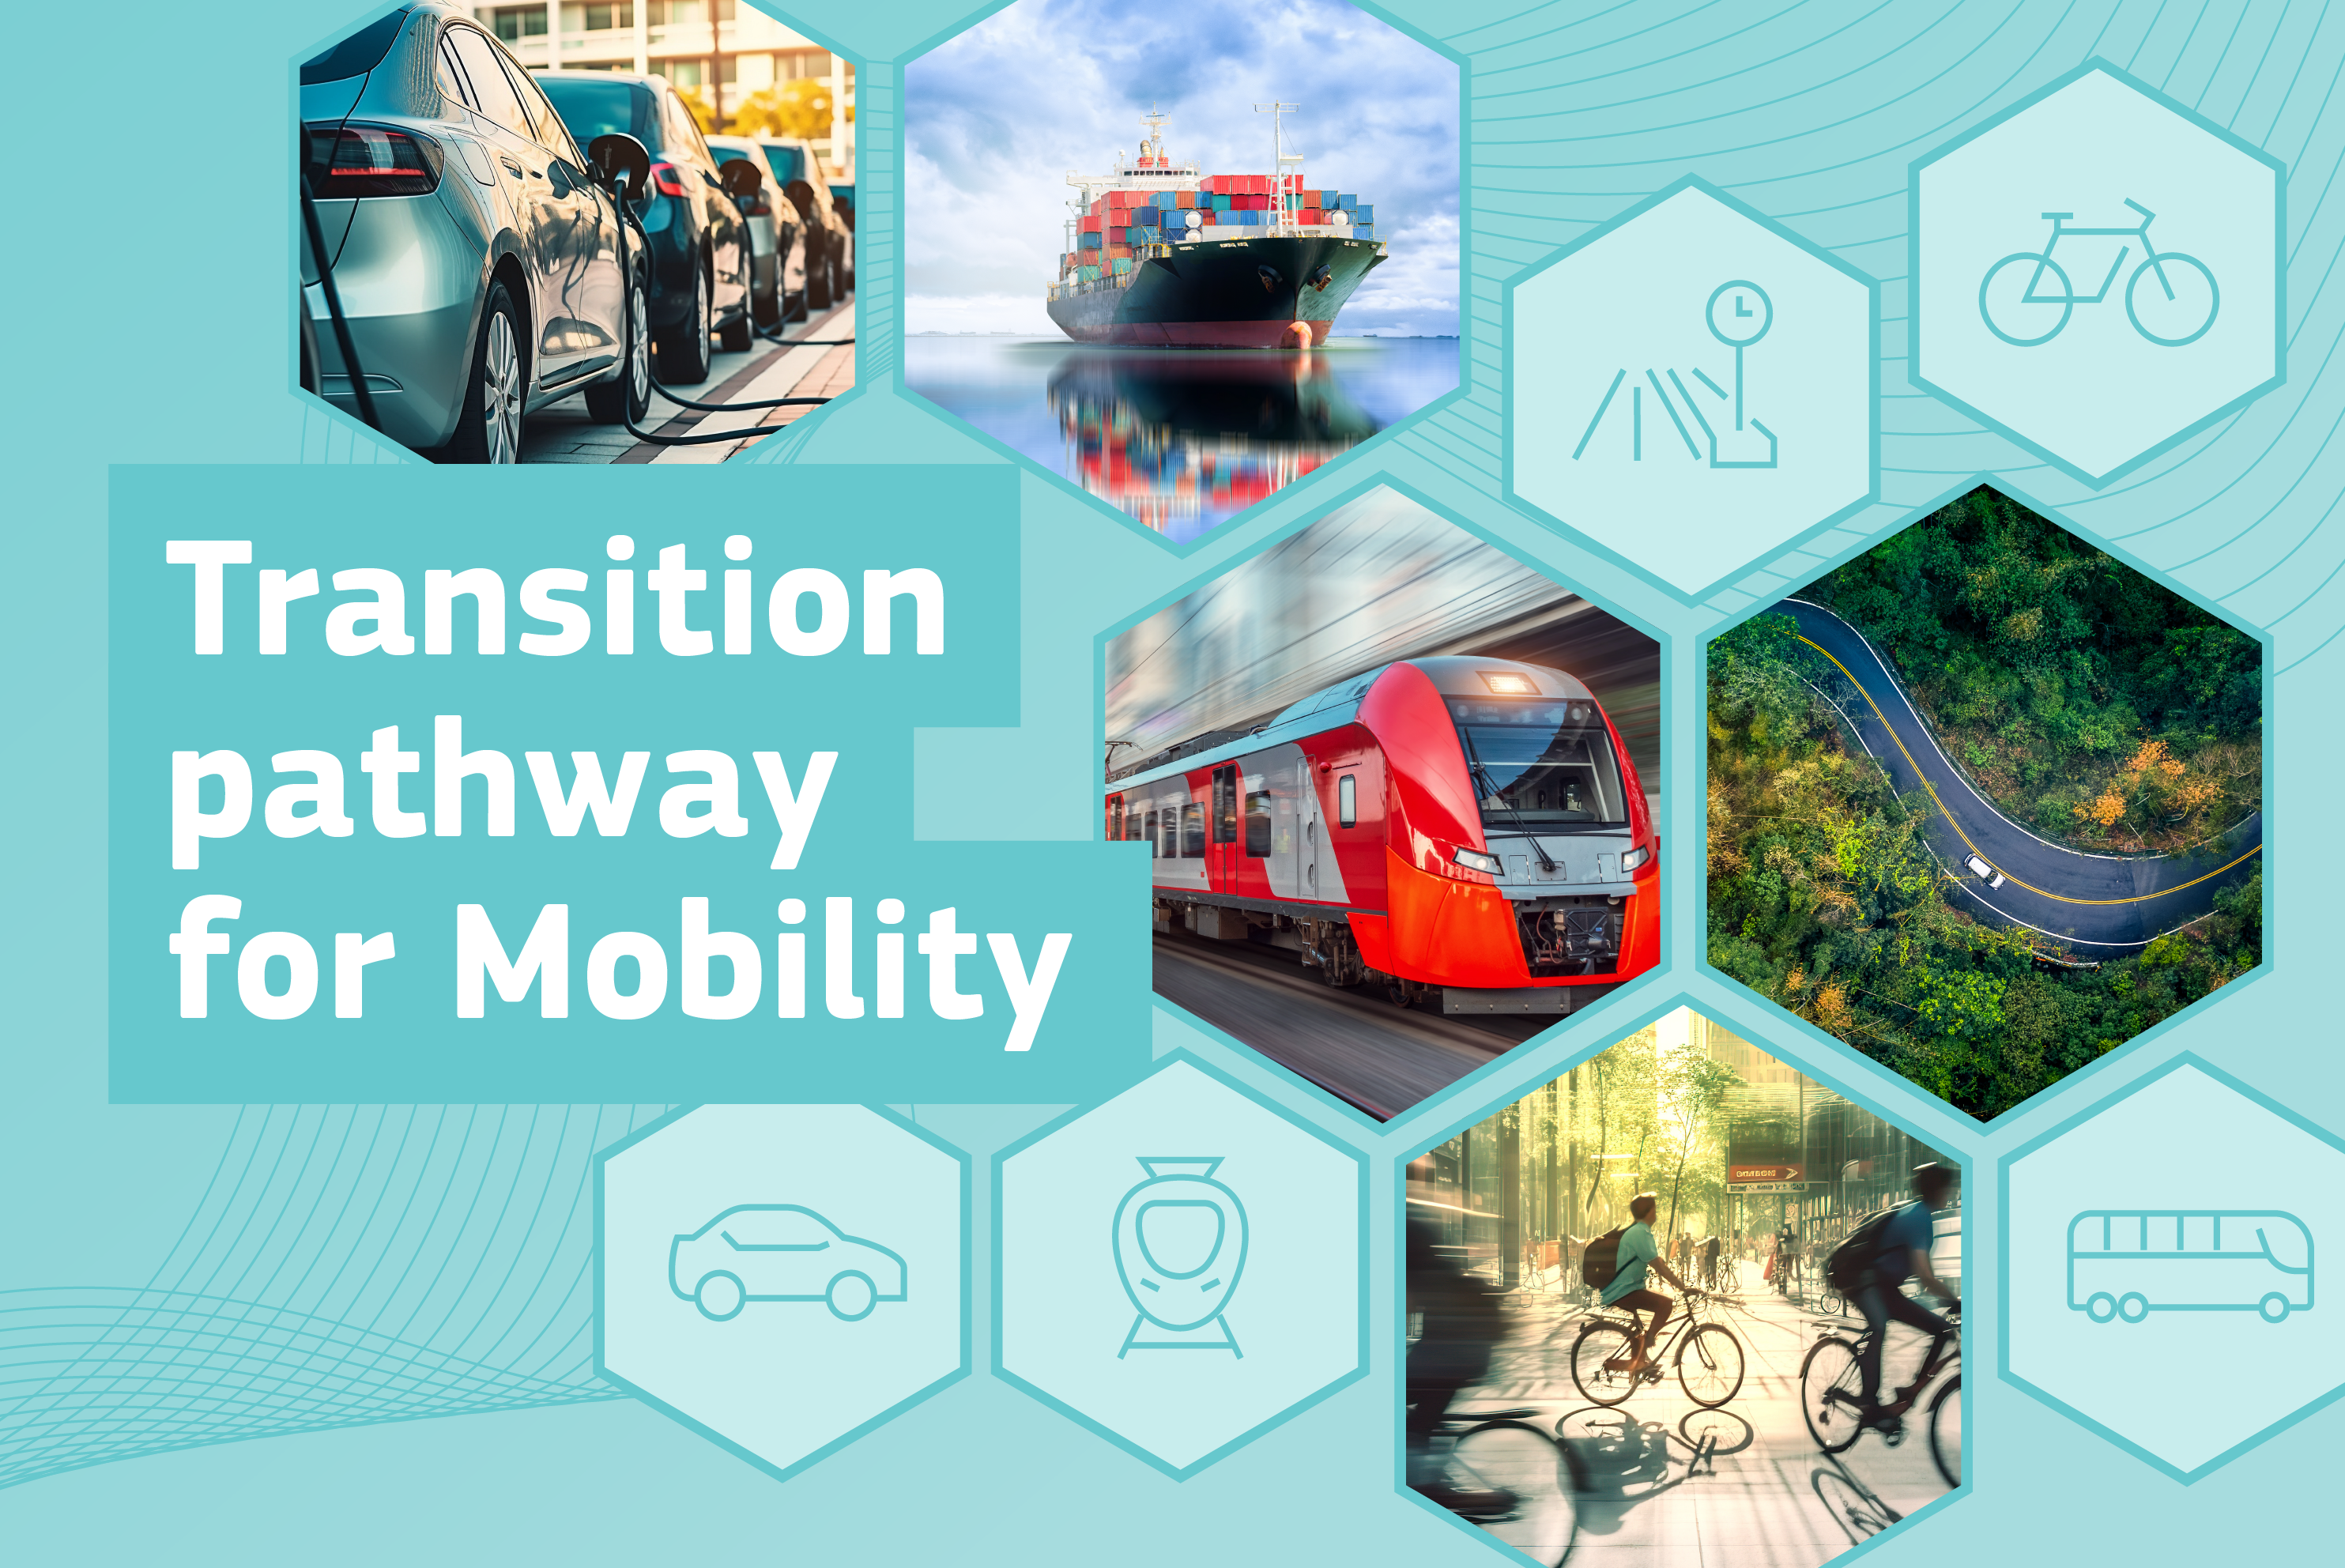 Roundtable event on the mobility transition pathway